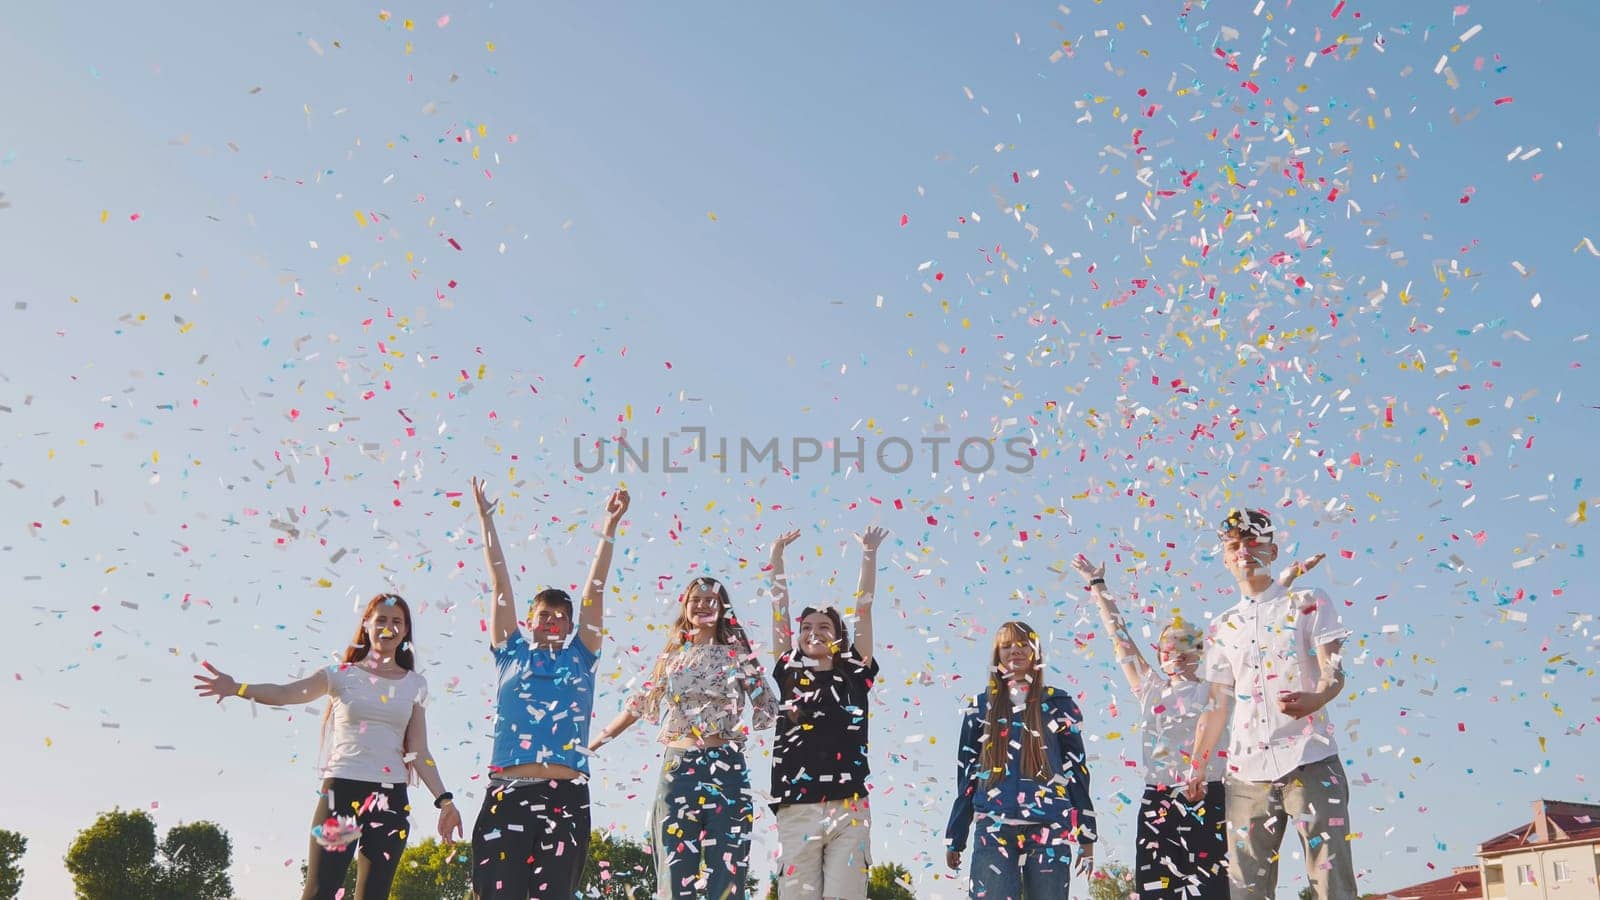 Friends toss colorful paper confetti from their hands. by DovidPro